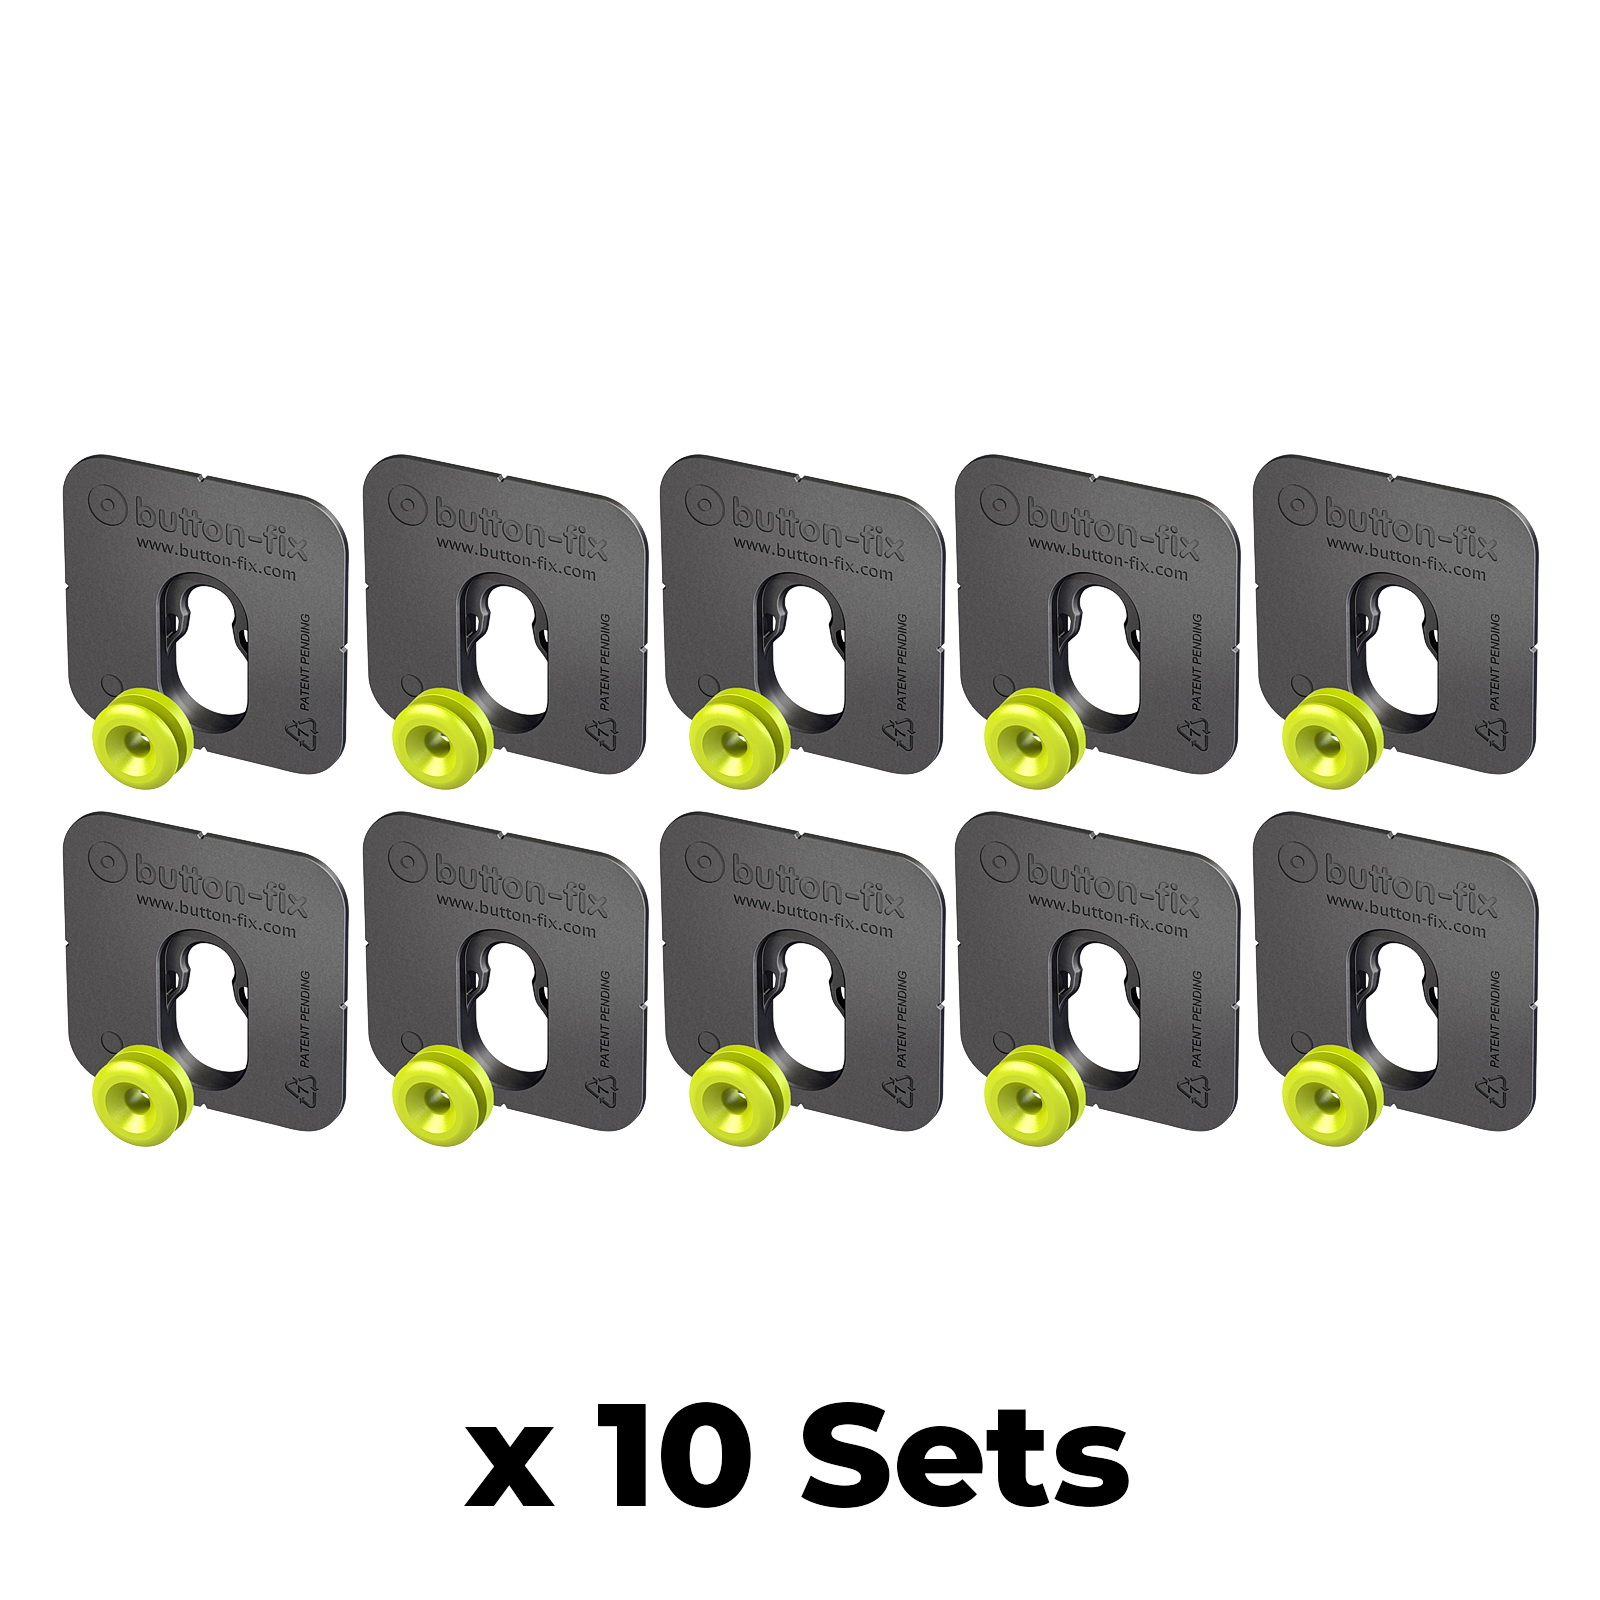 Button Fix Type 1 Bonded Bracket Marker Guide Kit Connecting 90º Degree Panels Quality x10